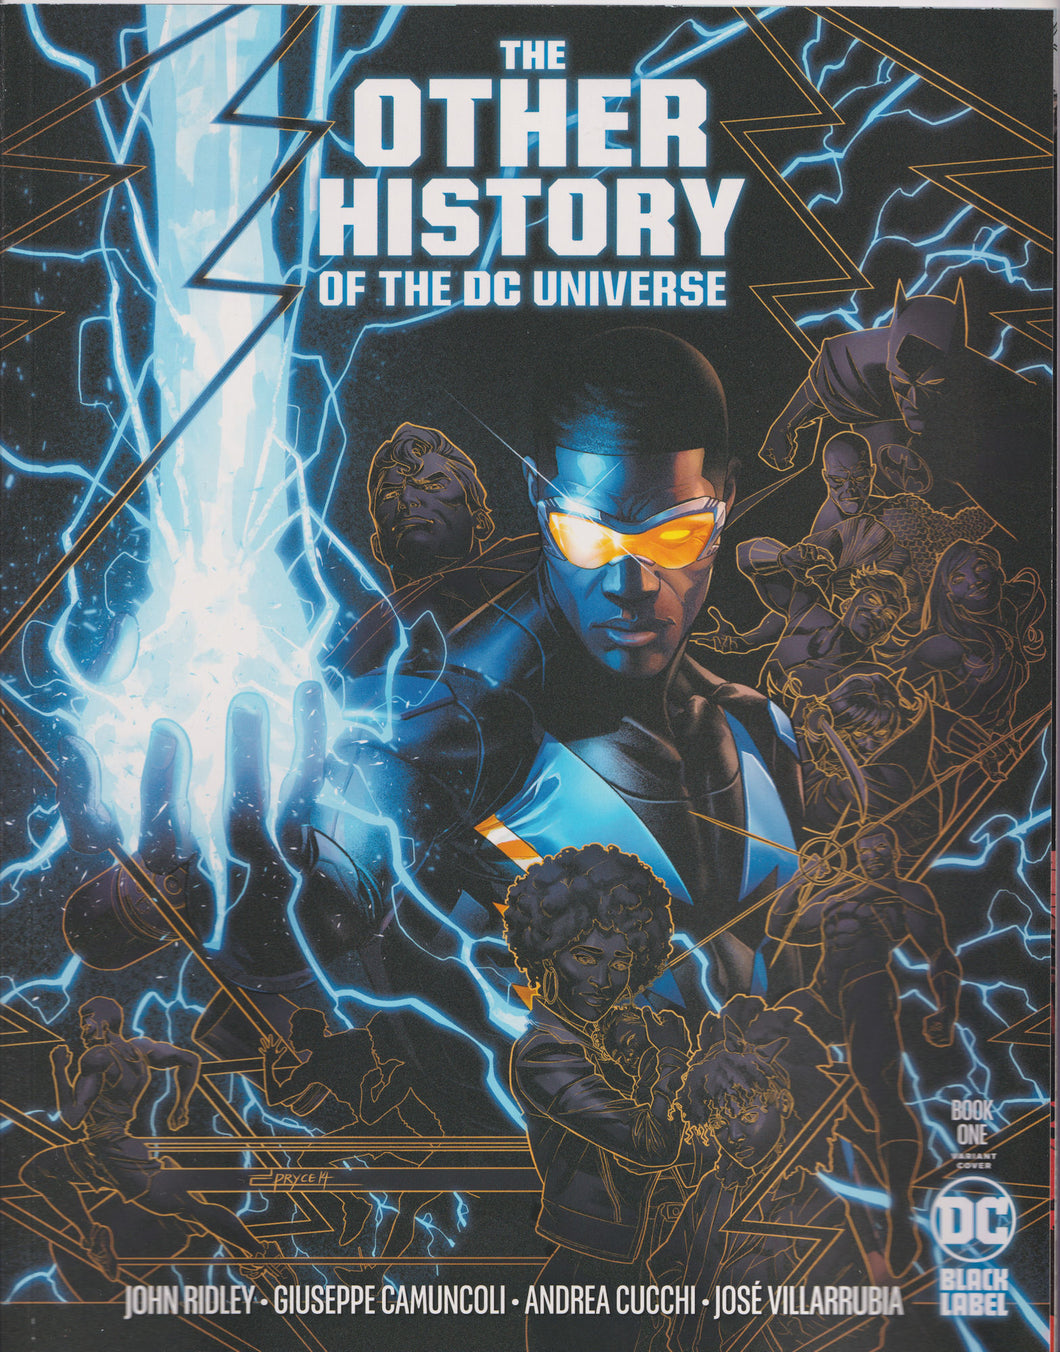 THE OTHER HISTORY OF THE DC UNIVERSE #1 (JAMAL CAMPBELL VARIANT)